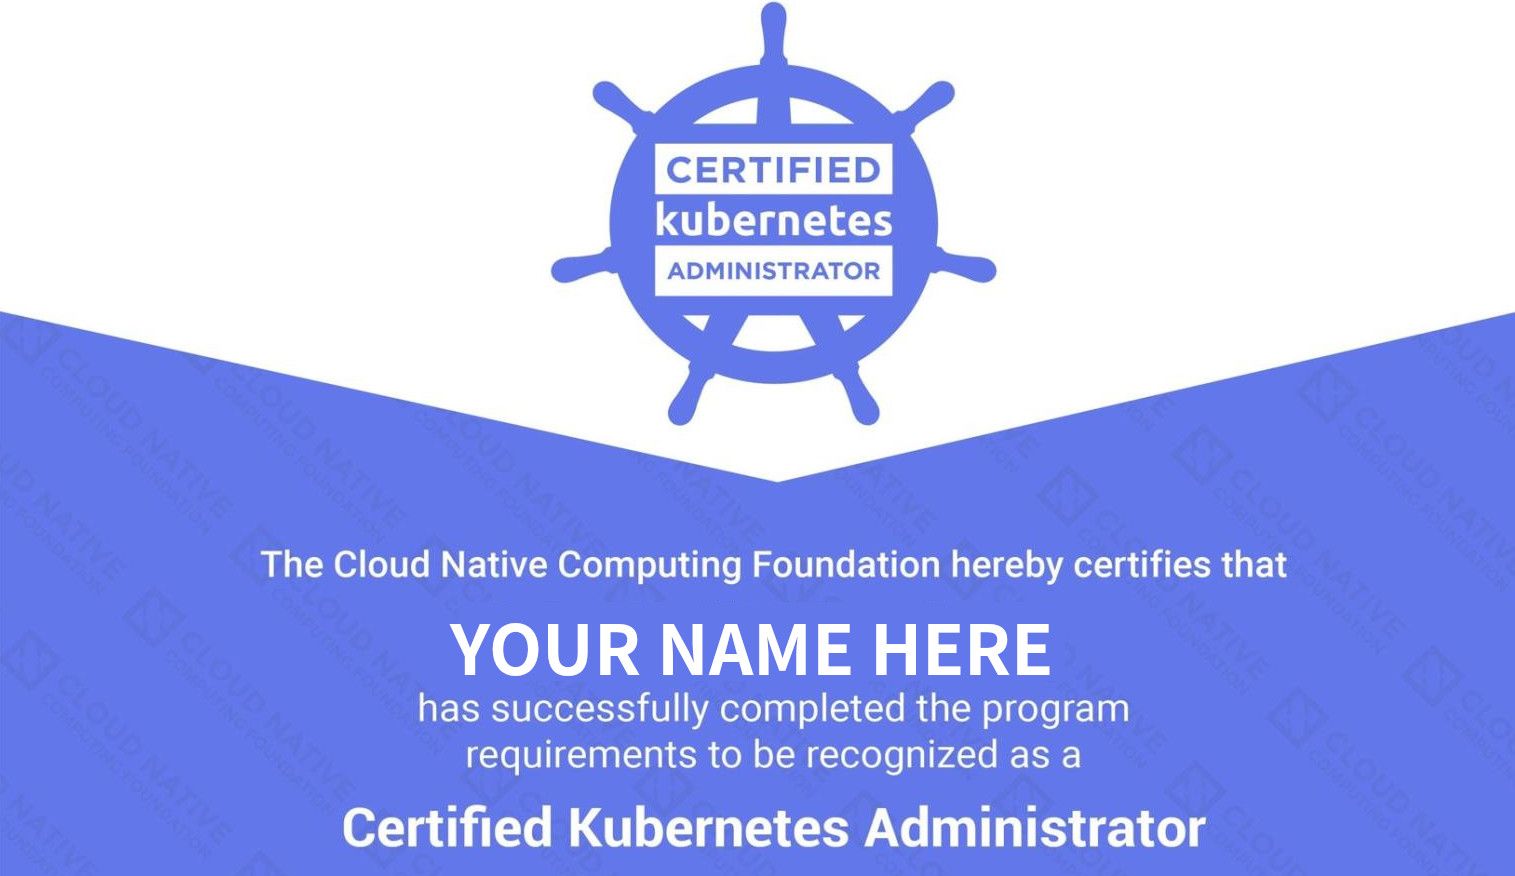 How I prepared & passed the Certified Kubernetes Administrator (CKA) Exam